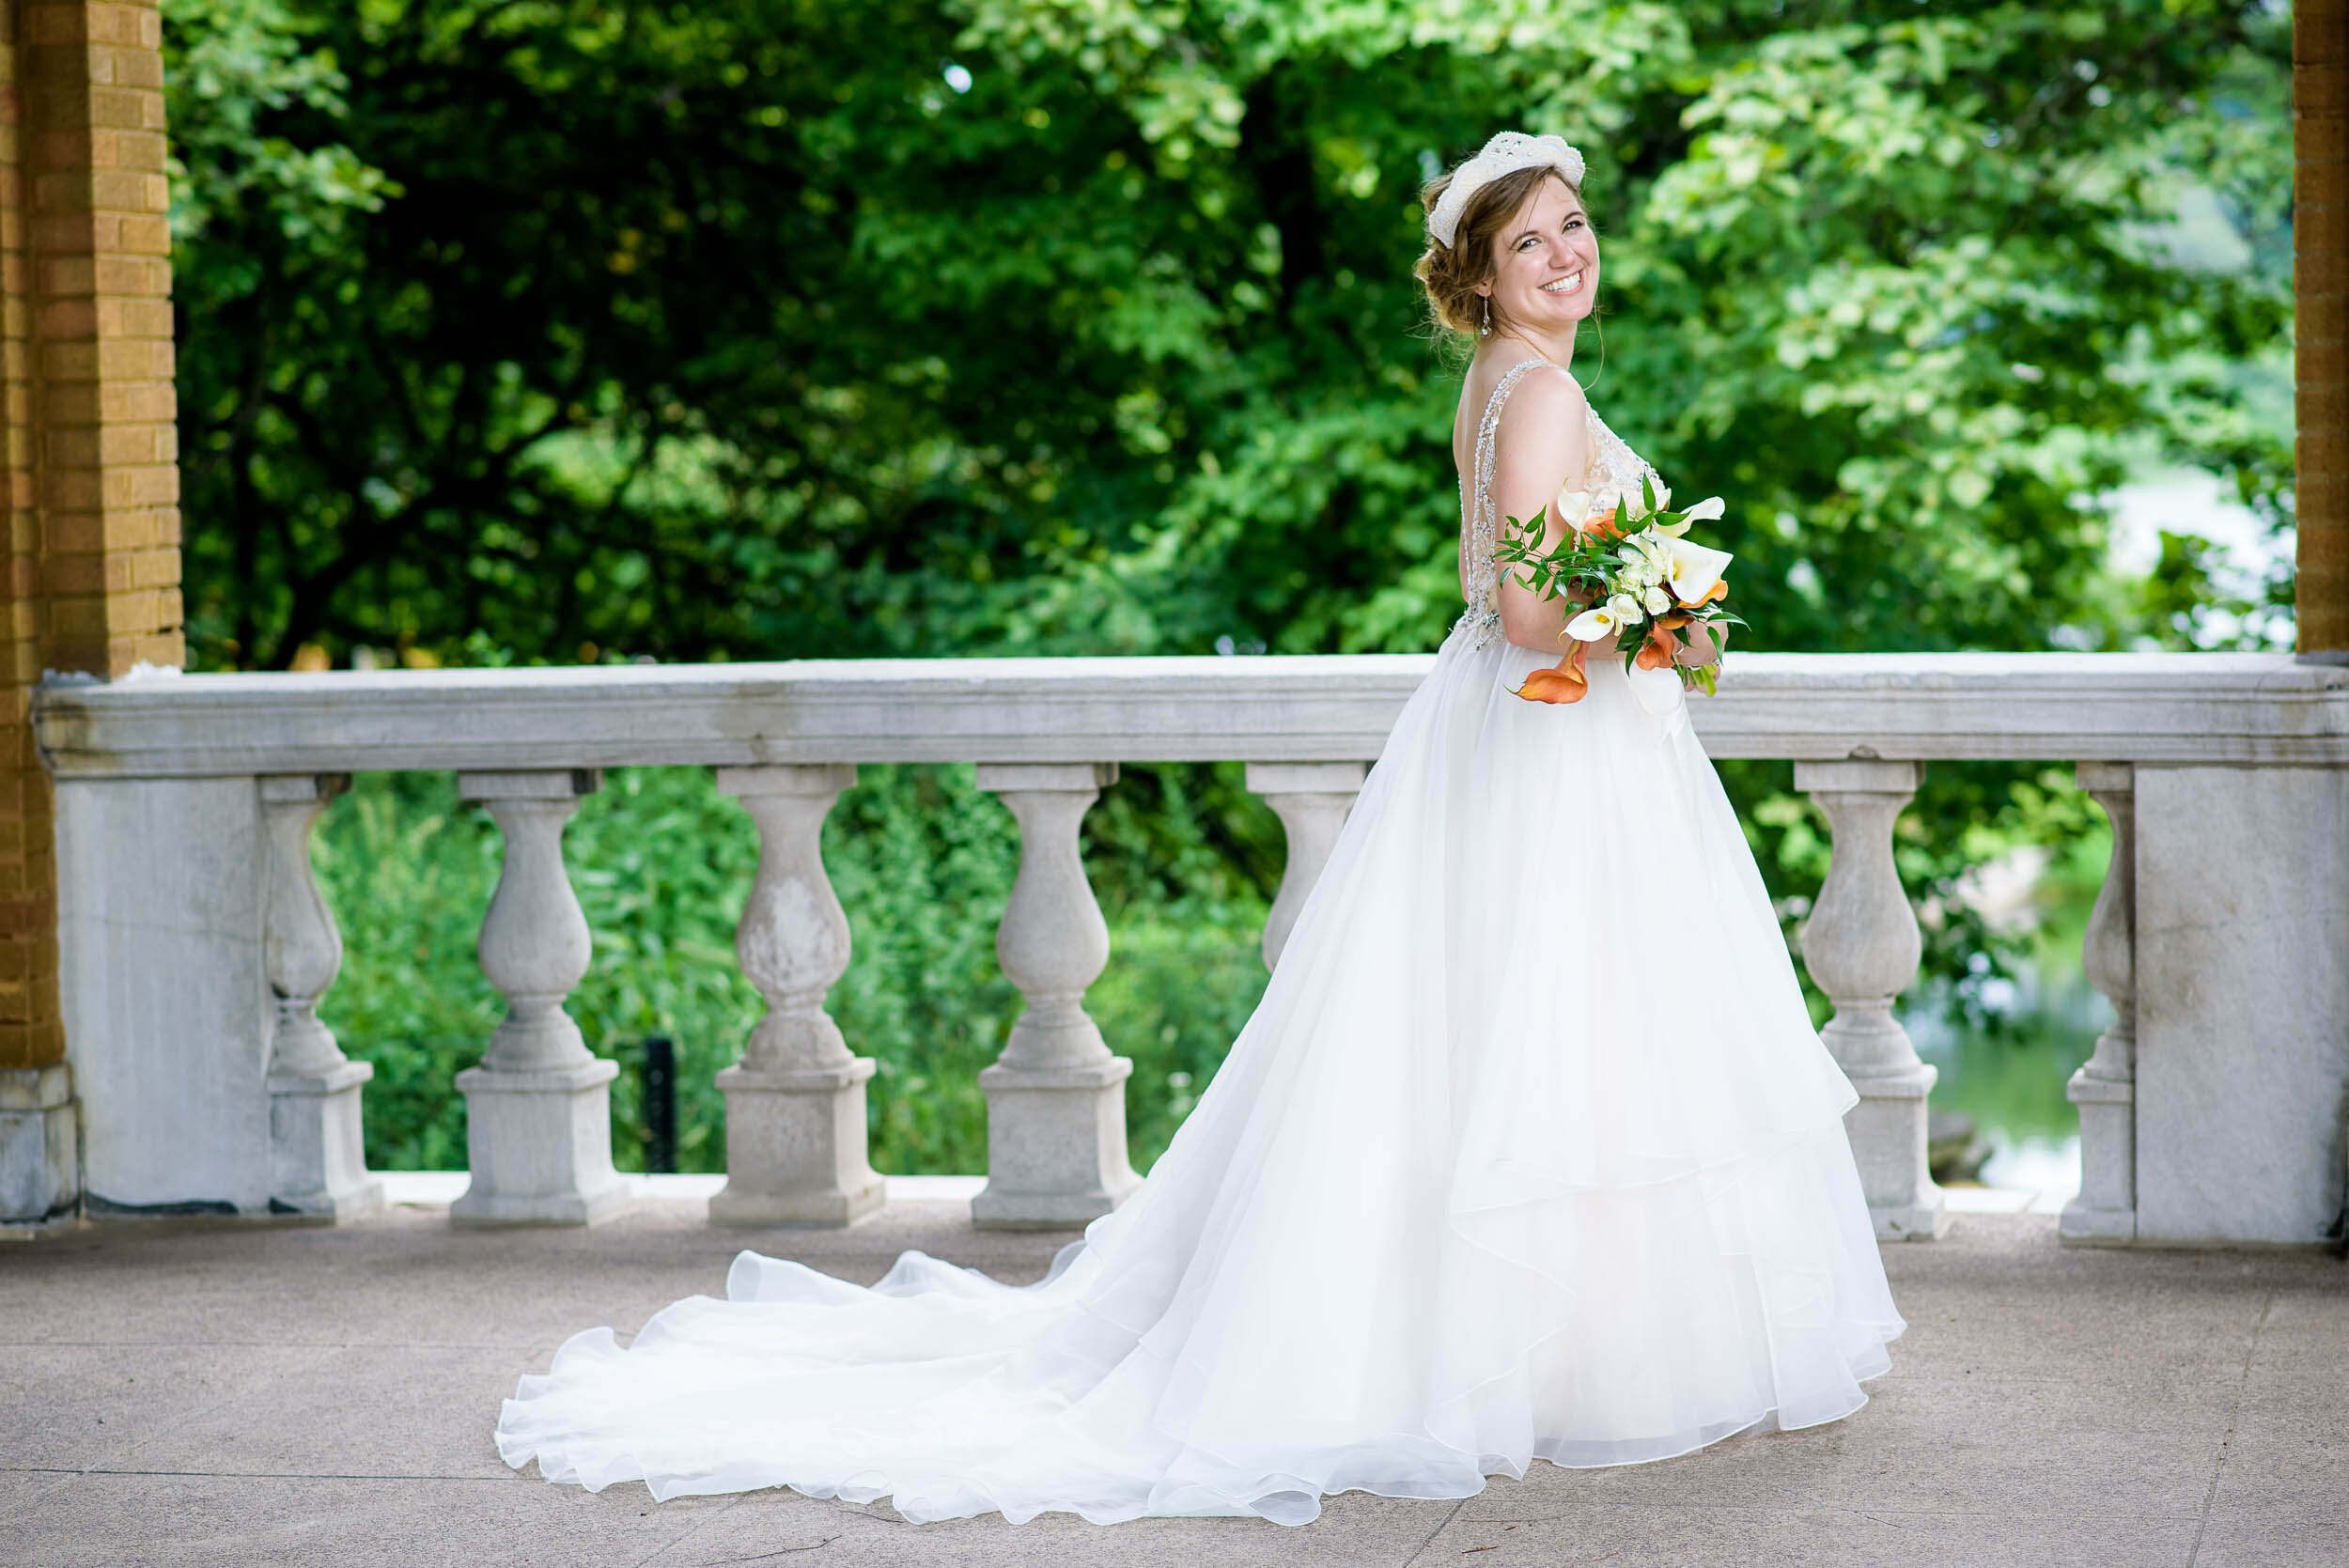 Outdoor bridal portrait: Columbus Park Refectory Chicago wedding captured by J. Brown Photography.